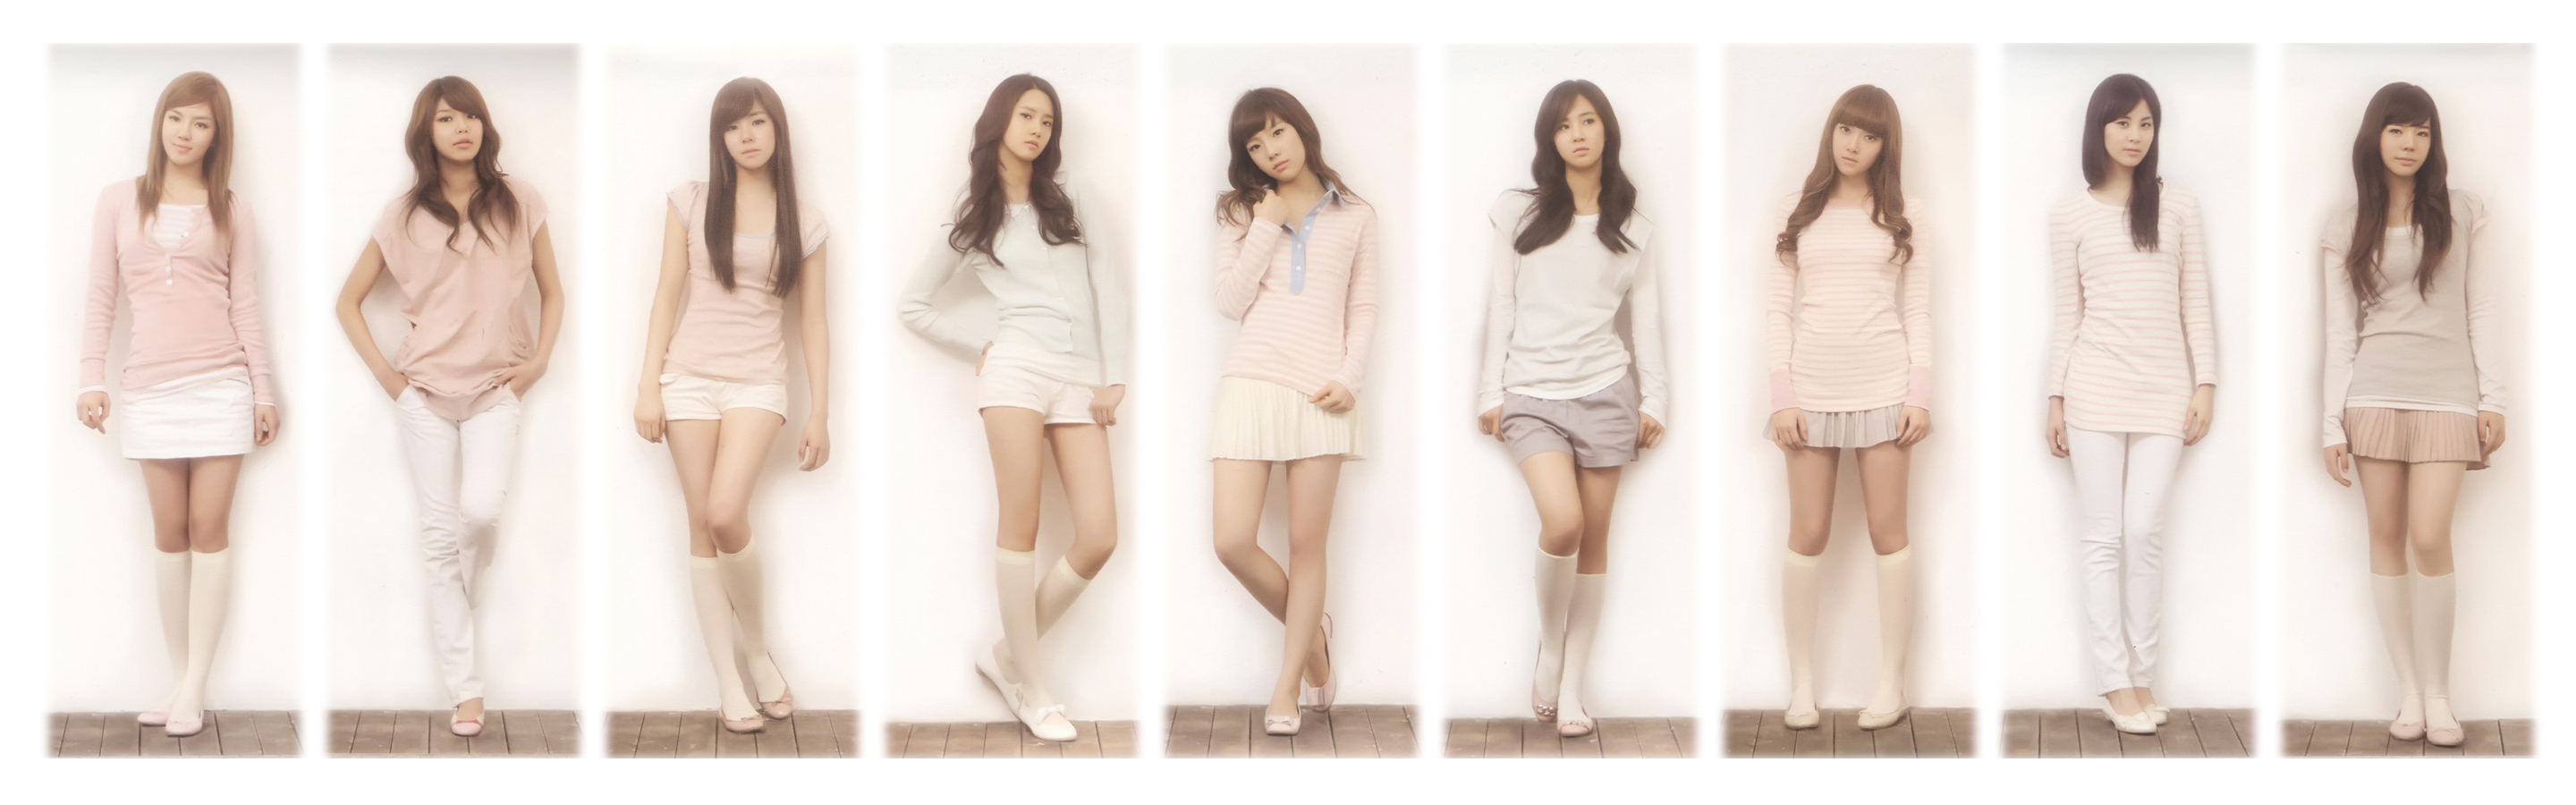 Snsd Dual Monitor Wallpaper By Jet St0rm Customization